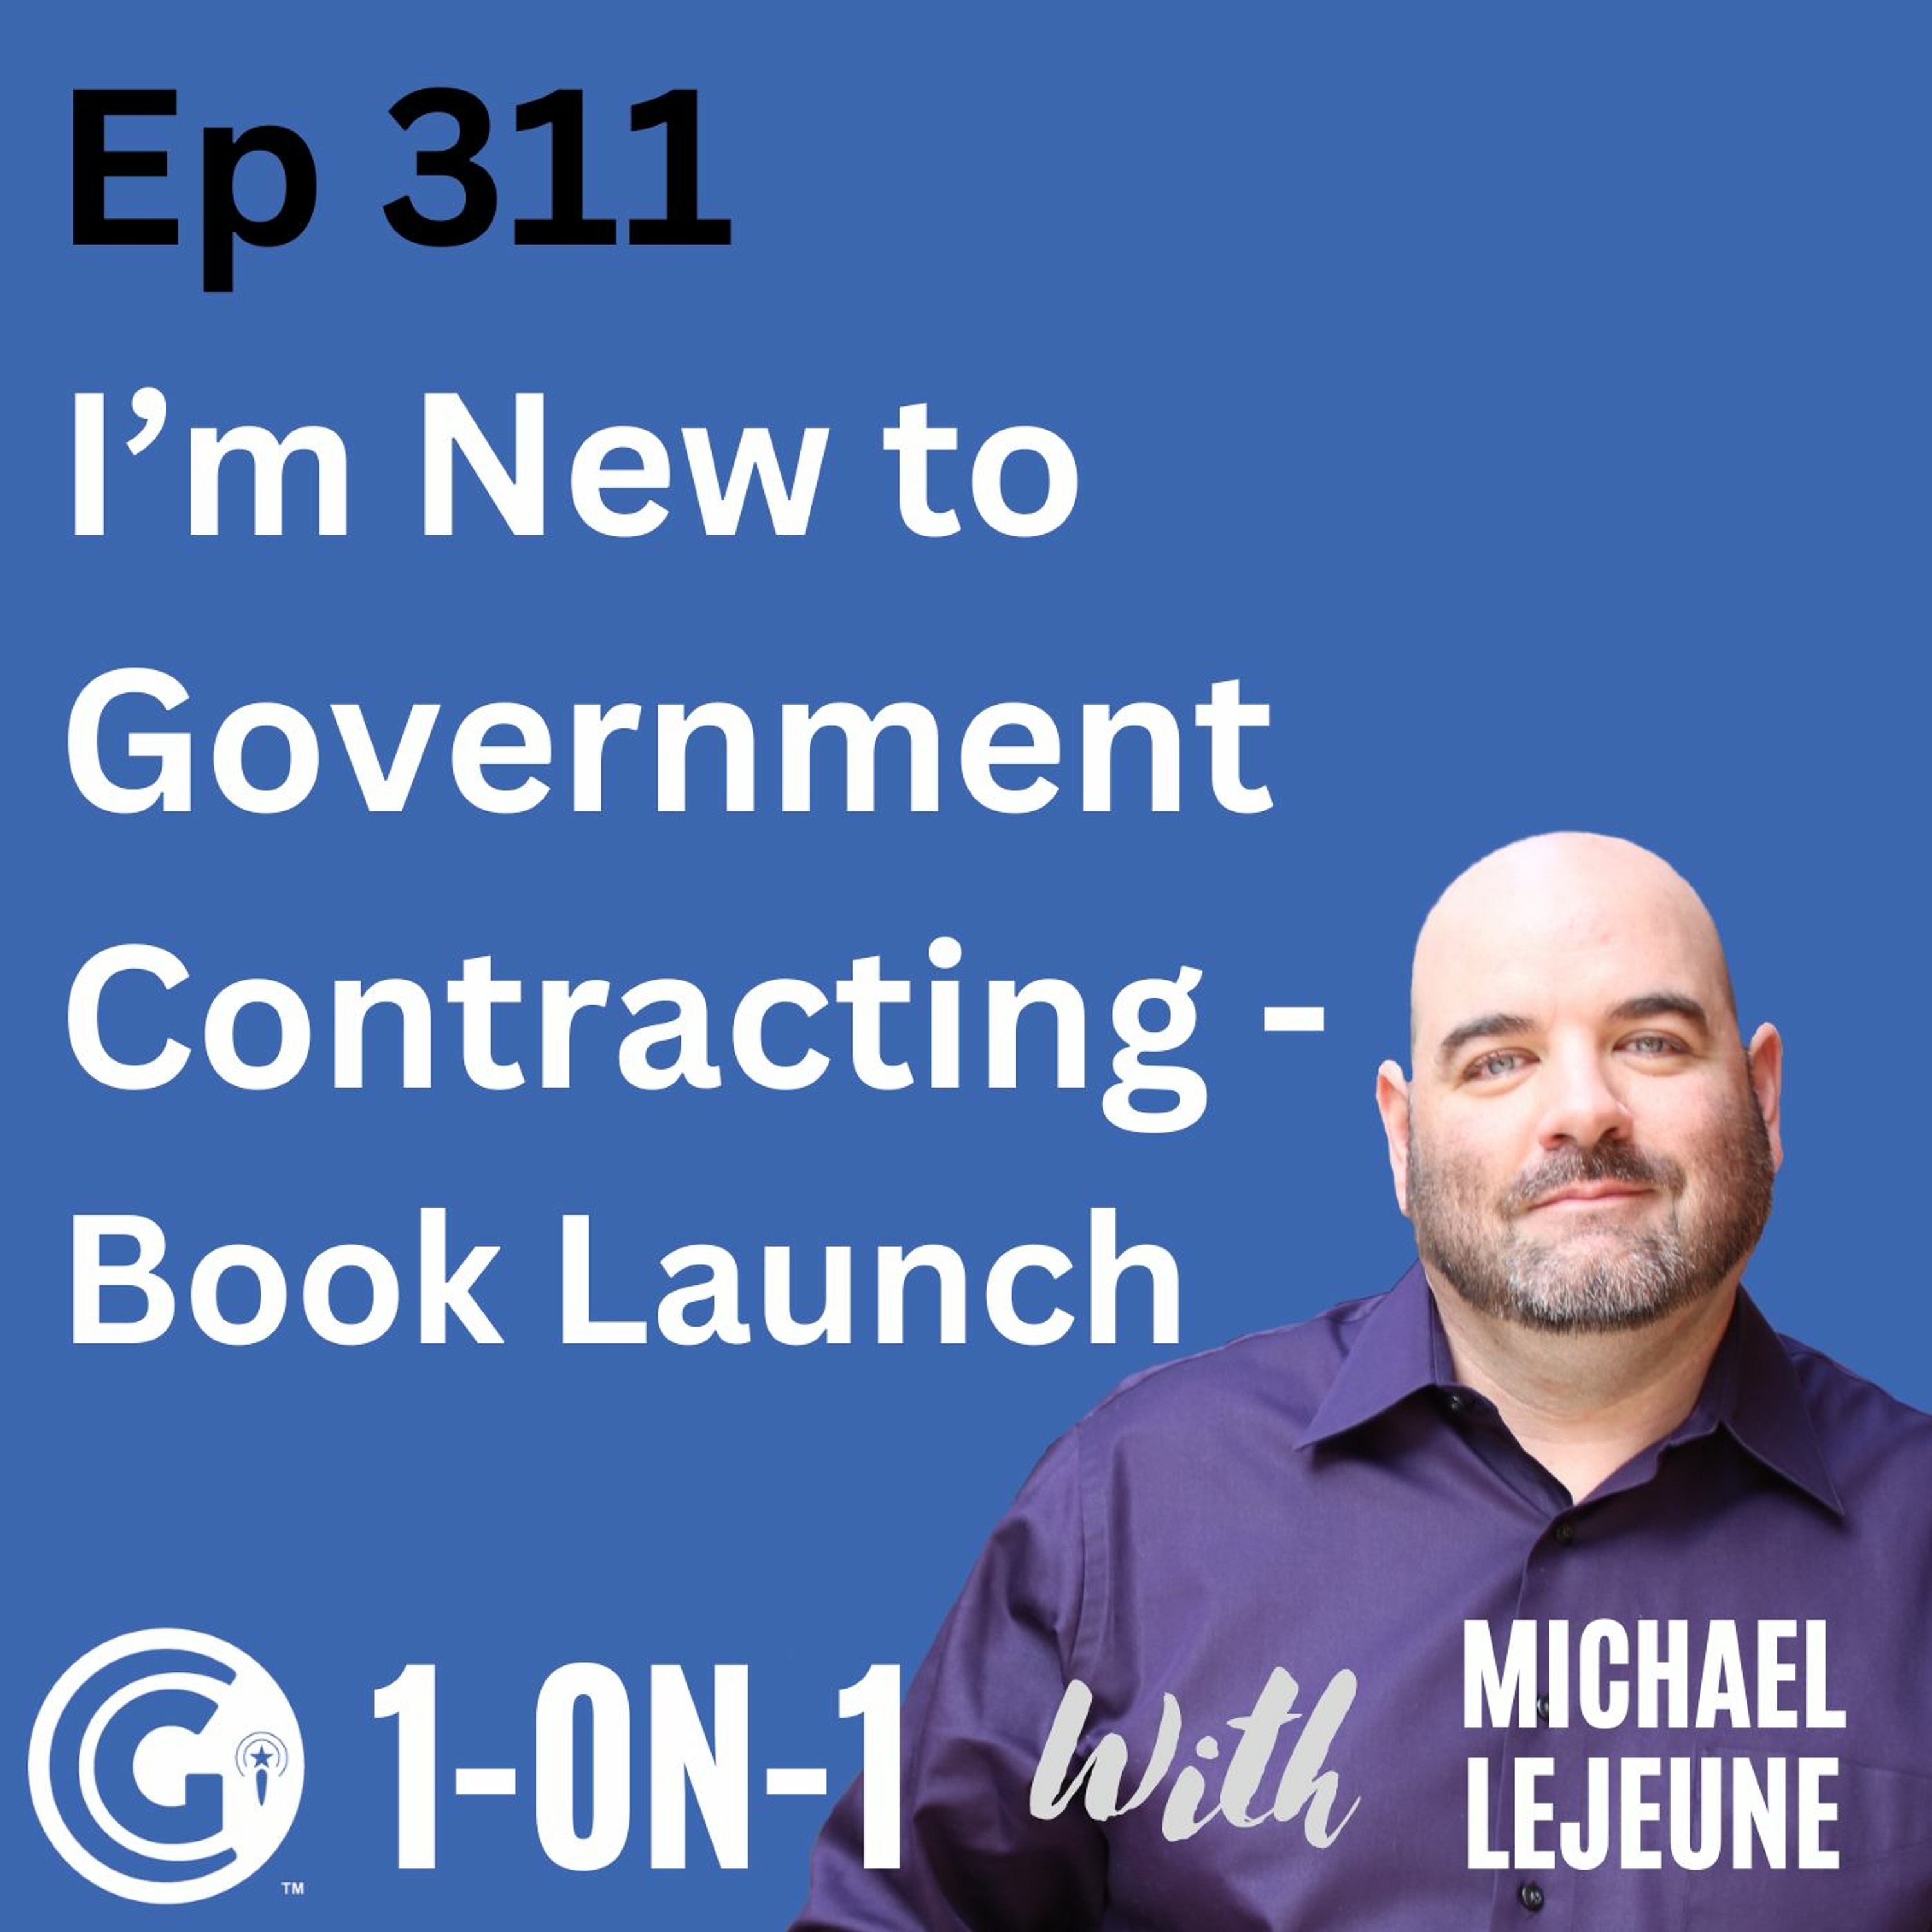 Ep 311: I’m New to Government Contracting. Where Should I Start? Book Launch